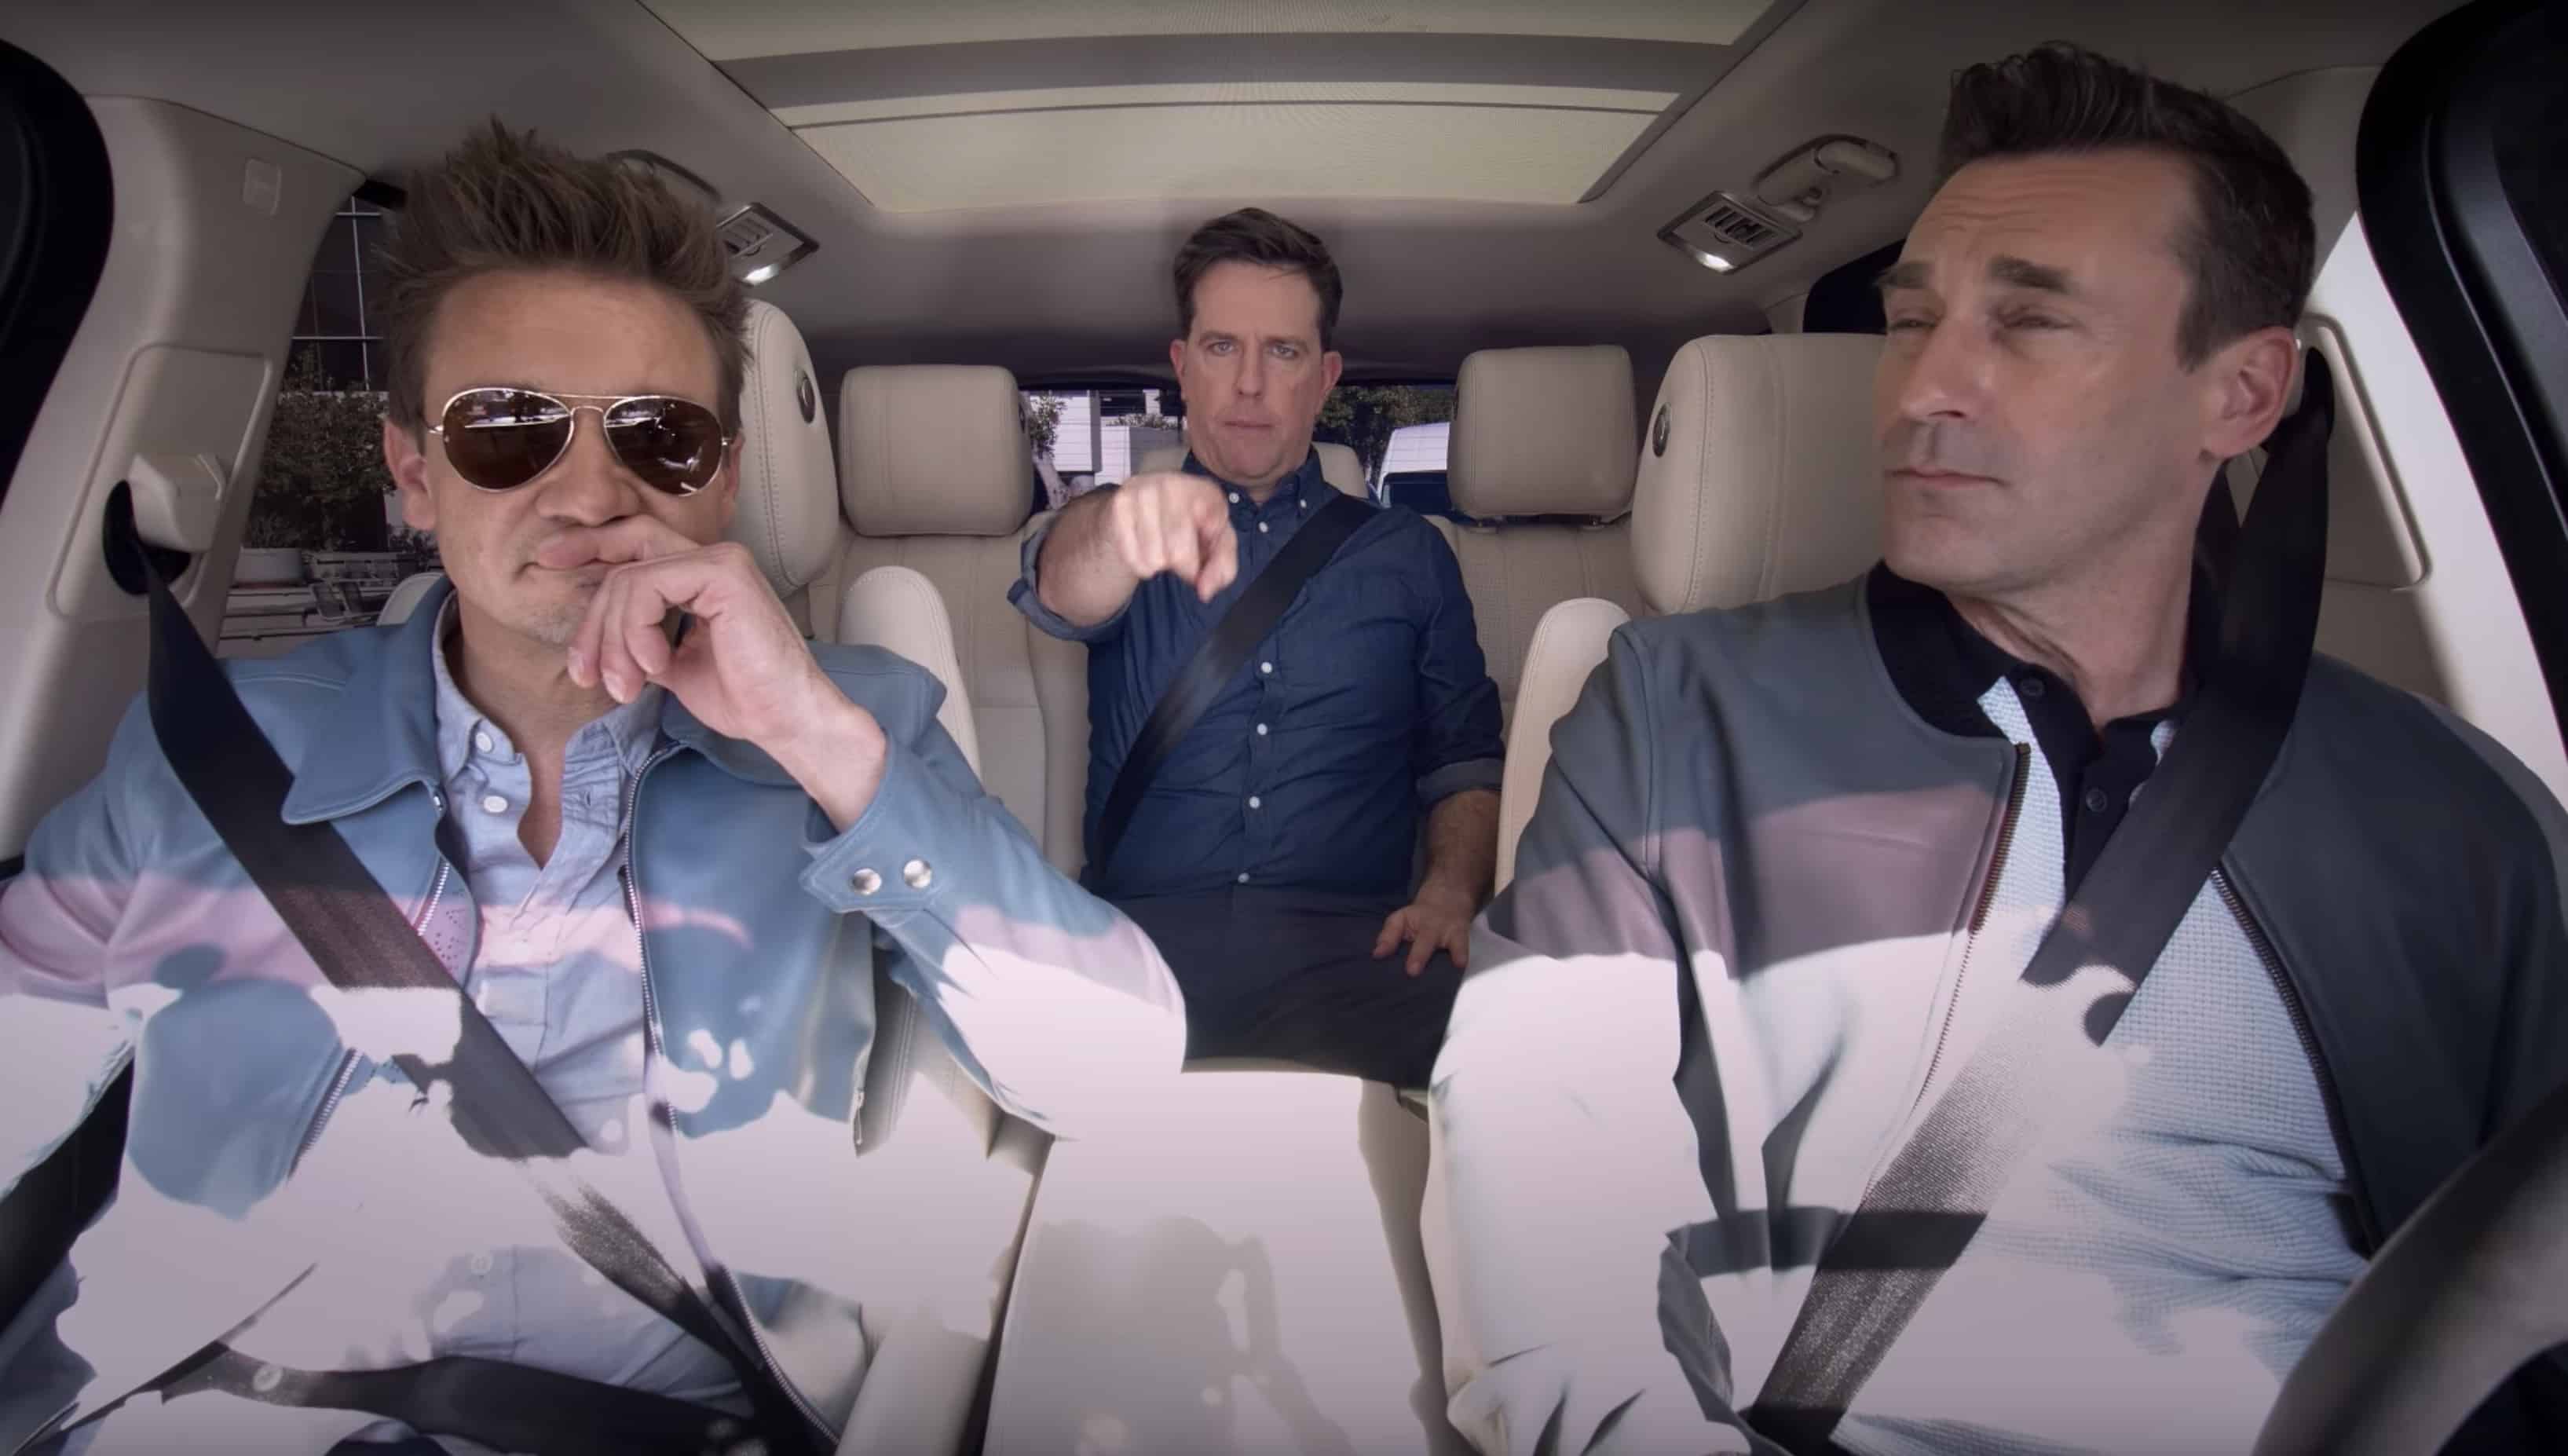 We all know Ed Helms can sing, but what about his Tag castmates? Find out in the new Carpool Karaoke teaser.